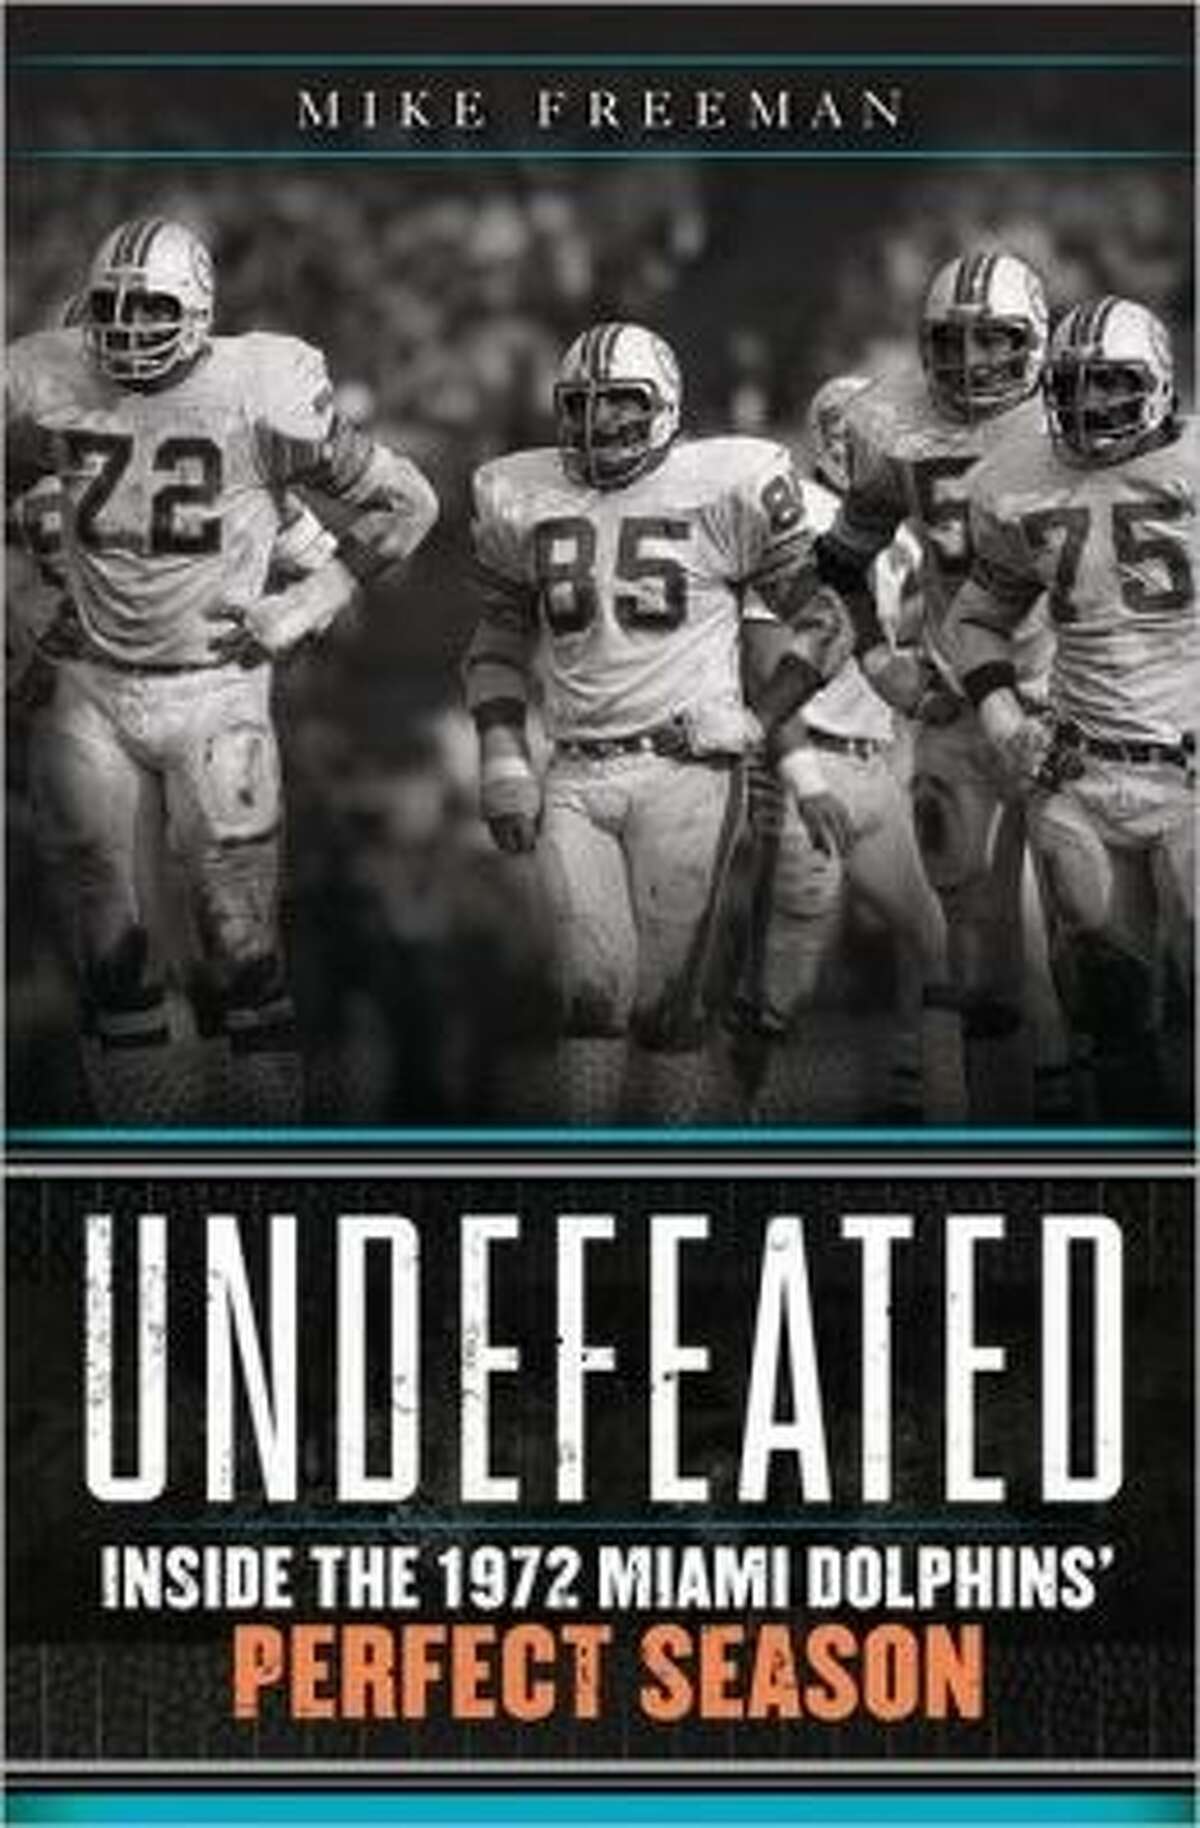 ‘Undefeated’ is a winner in sports books